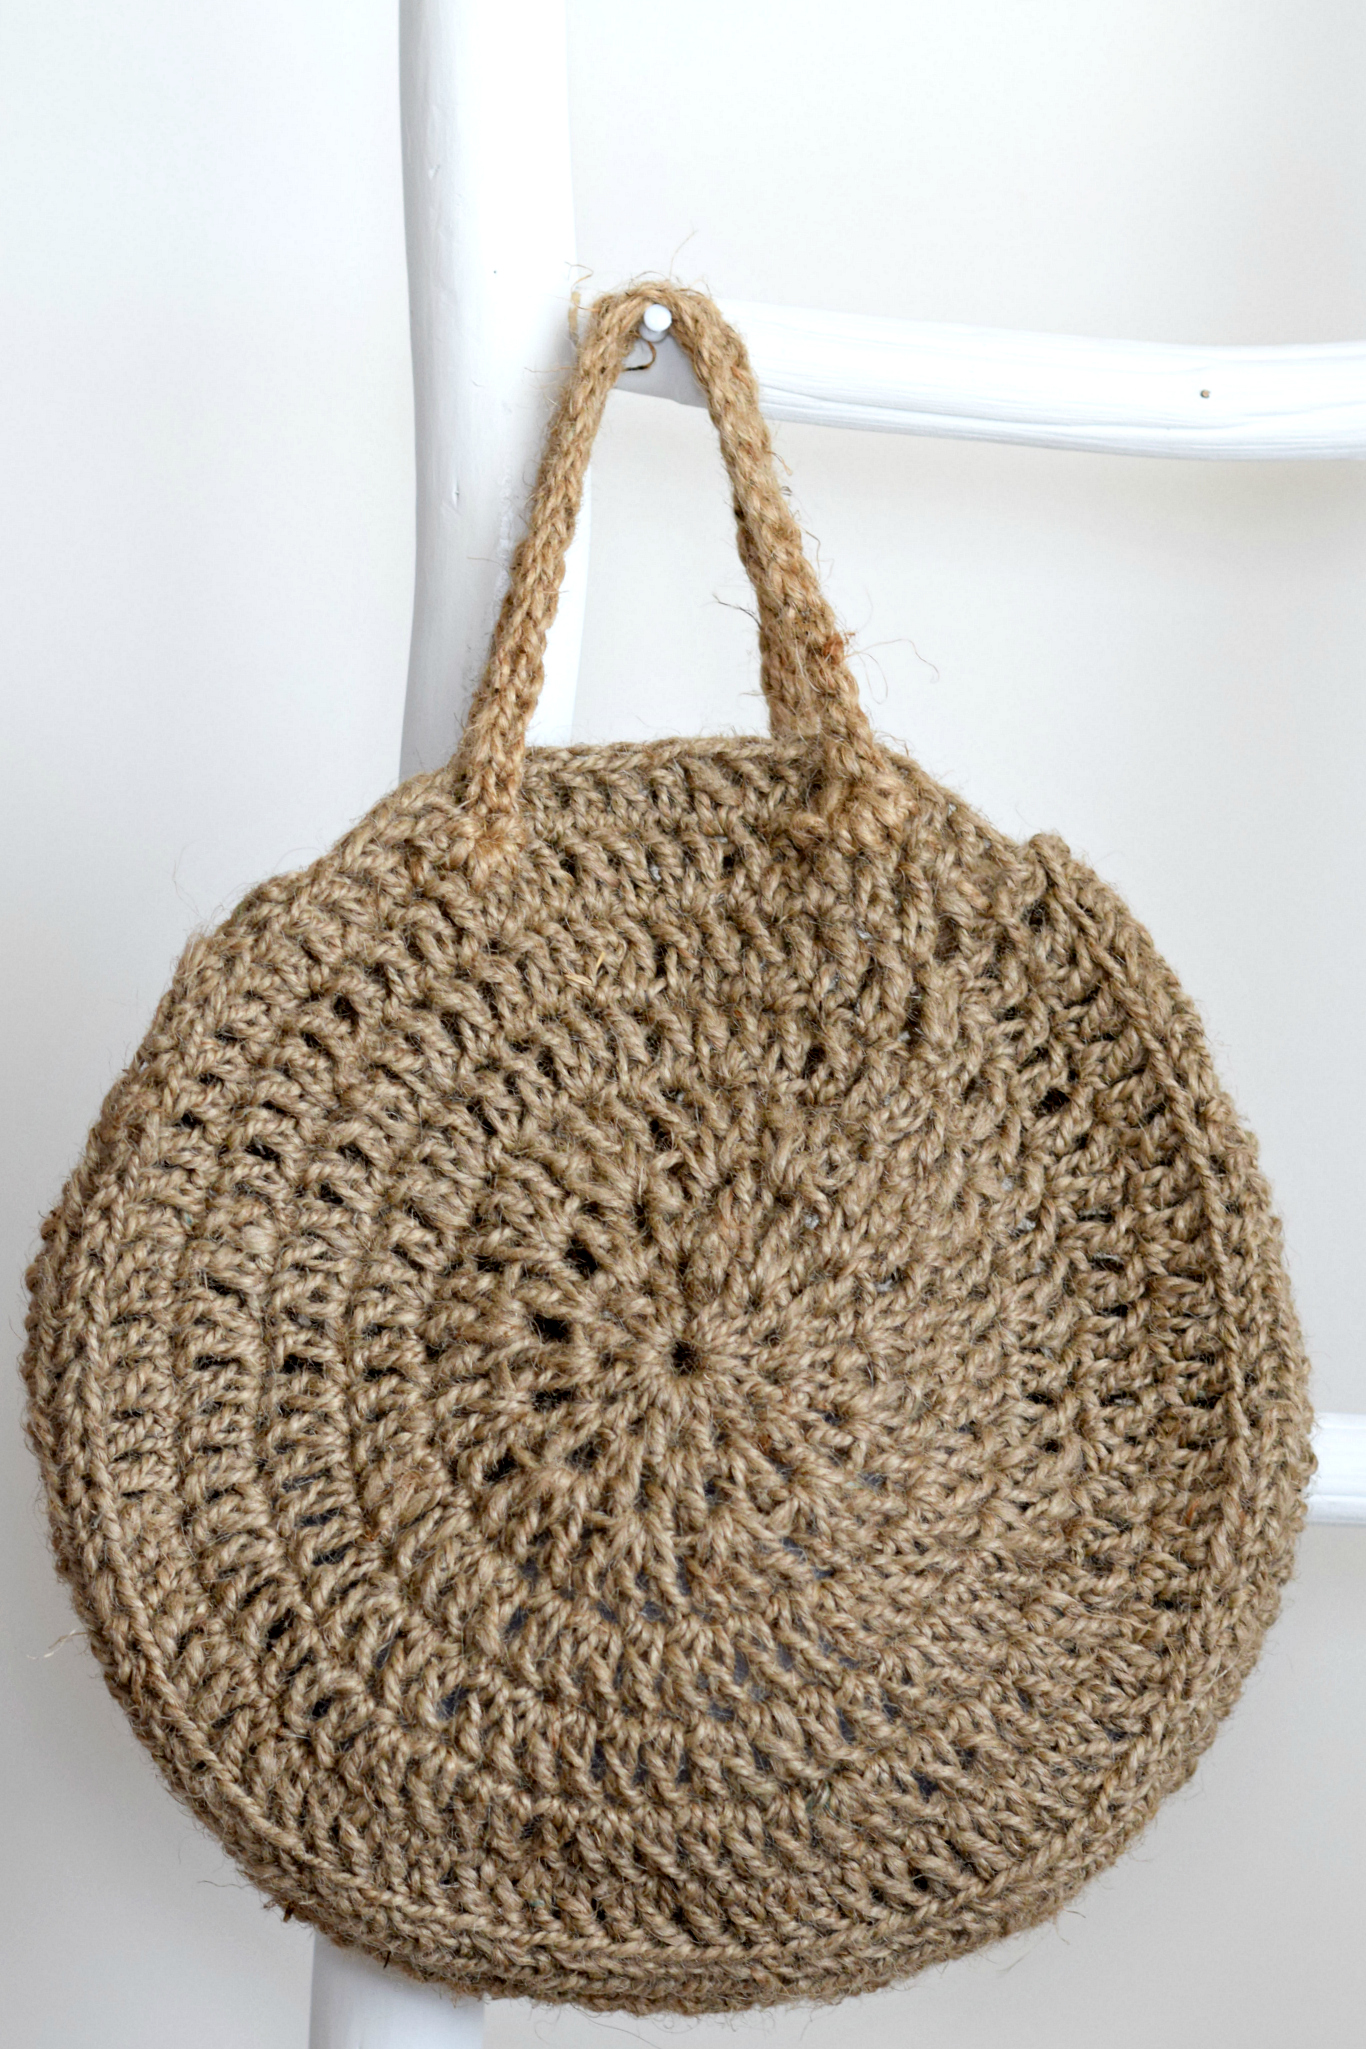 Crocheted Bag PATTERN Round Purse With Mandala Overlay Crochet Small  Crossbody Bag With Strap Instant Download - Etsy